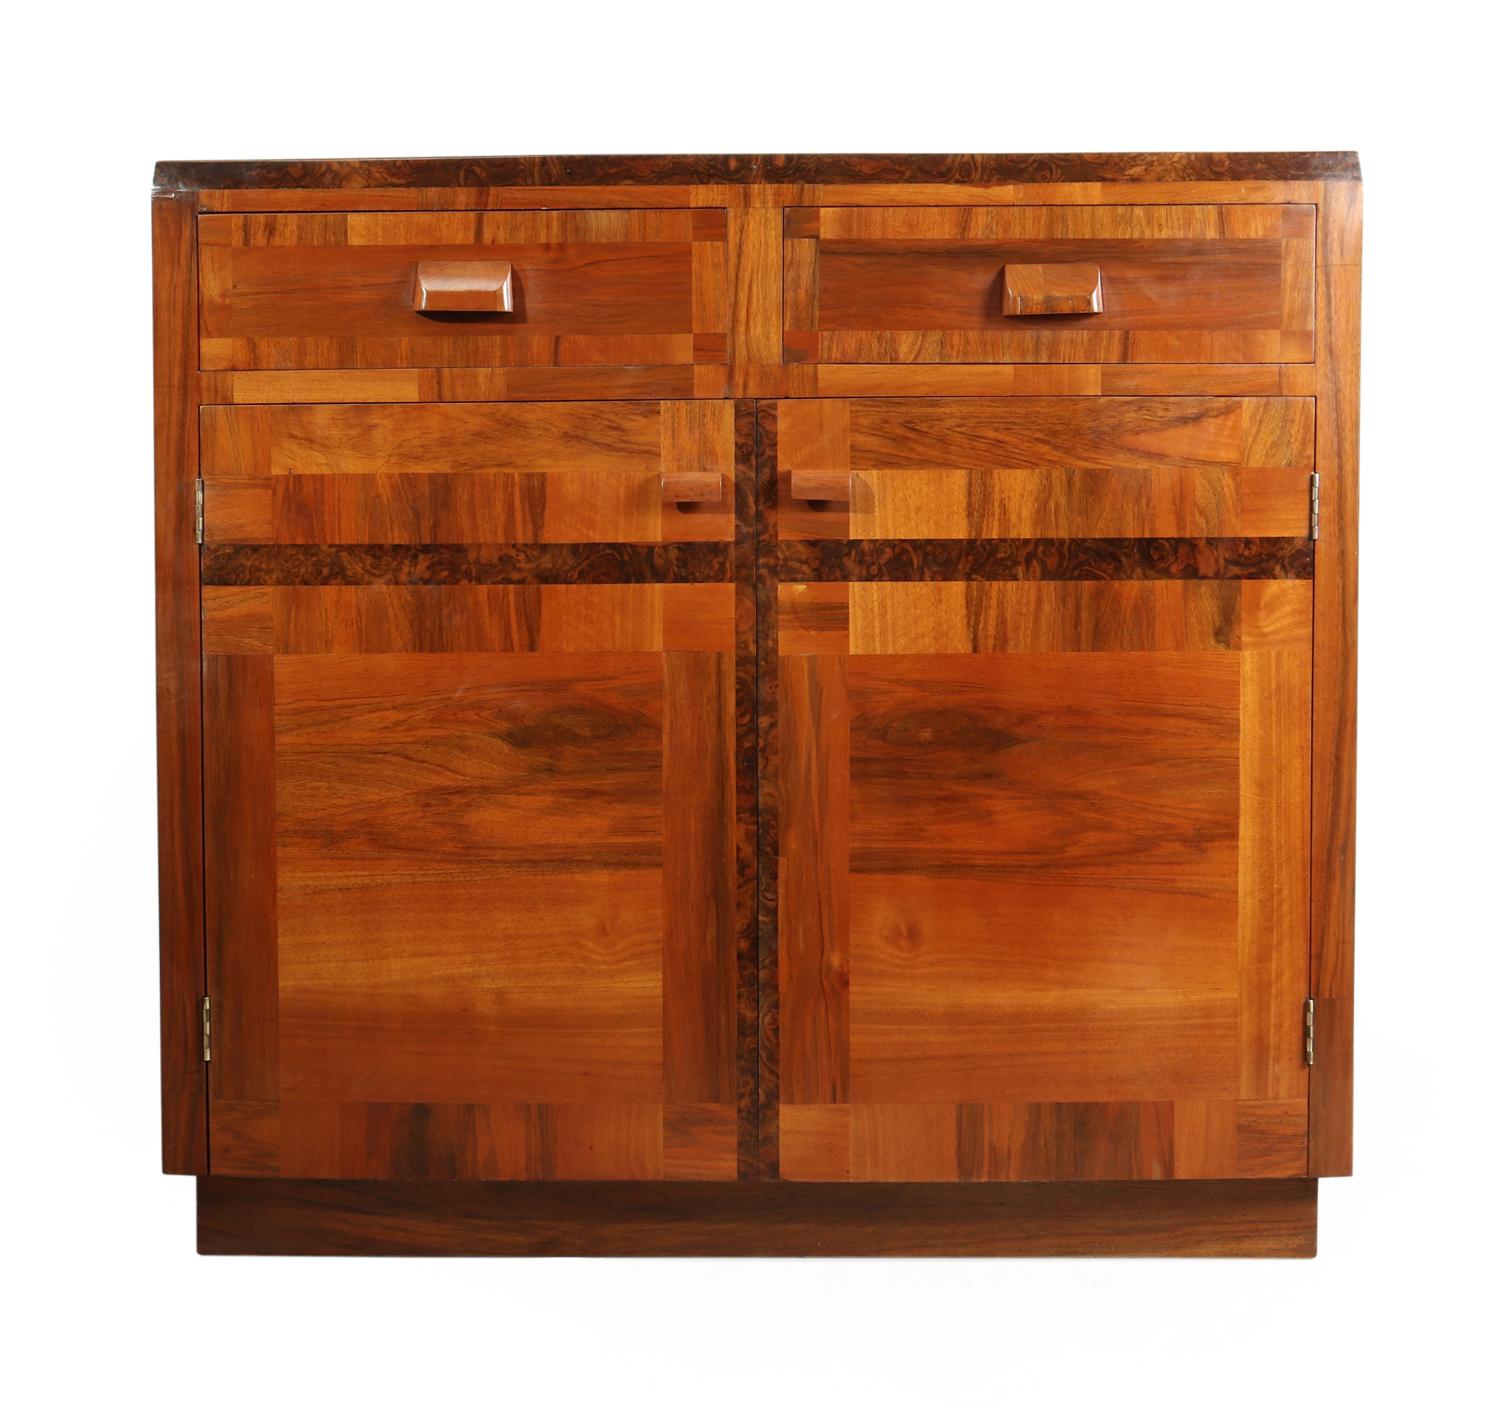 Art Deco sideboard in walnut, circa 1930
This original Art Deco sideboard is in walnut and burr walnut, from the 1930s and was made in the UK, it has dovetail joint construction and has been fully restored and hand polished to be in very good